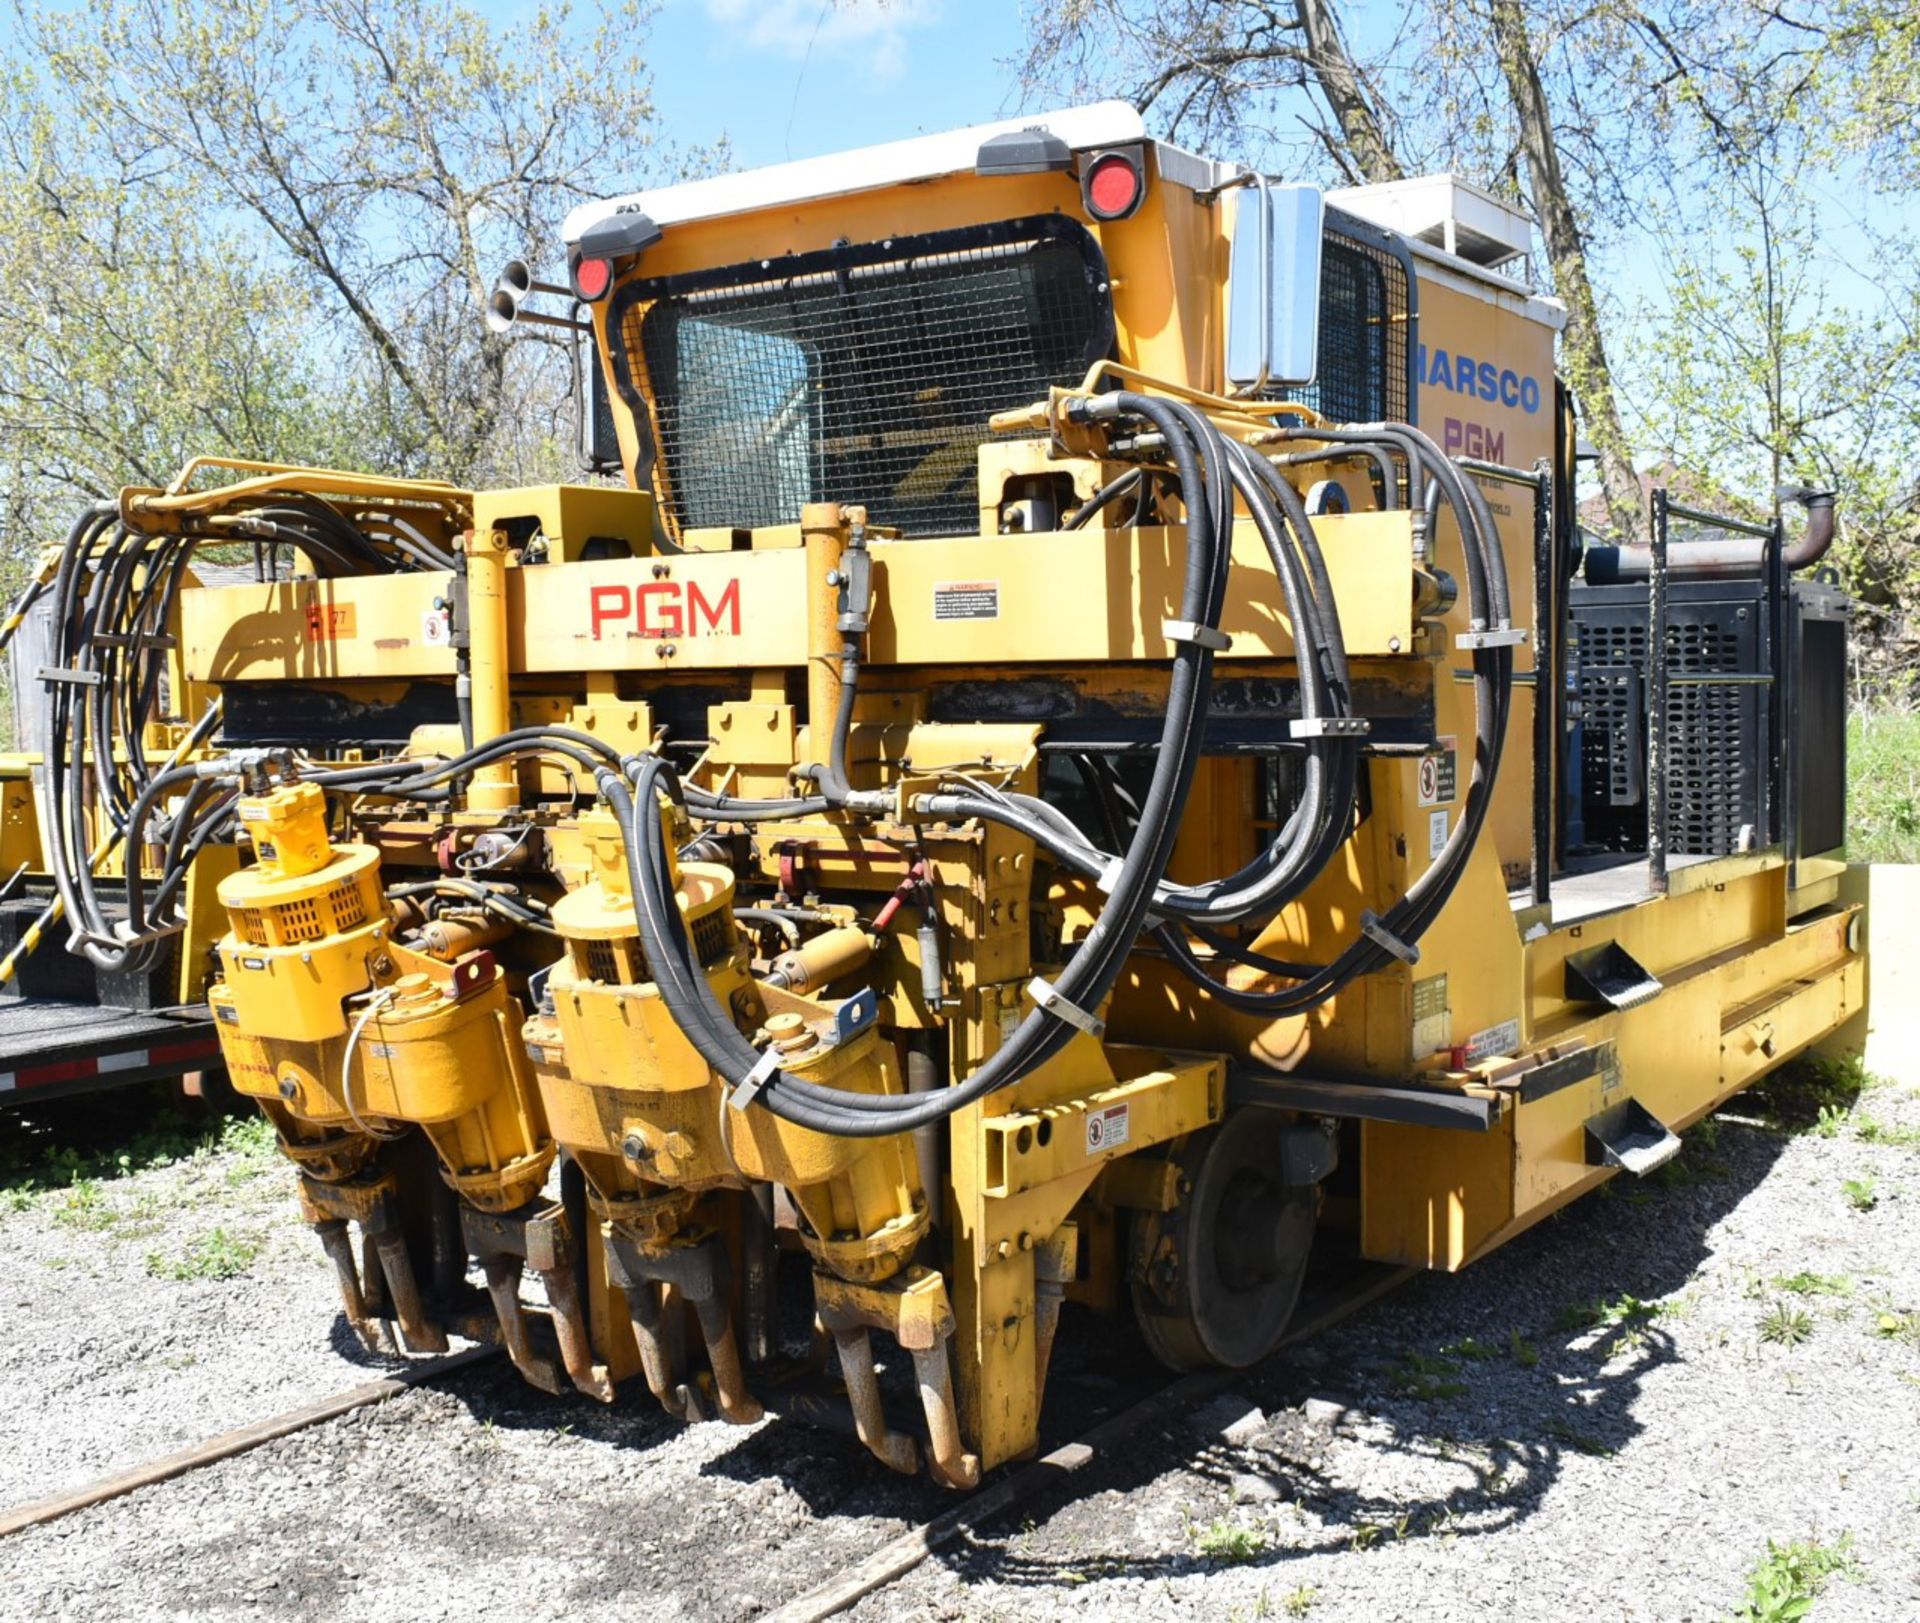 HARSCO/QUALITY TRACK EQUIPMENT JHS TAMPER WITH DIESEL ENGINE, JUPITER I CONTROLS, FULLY ENCLOSED